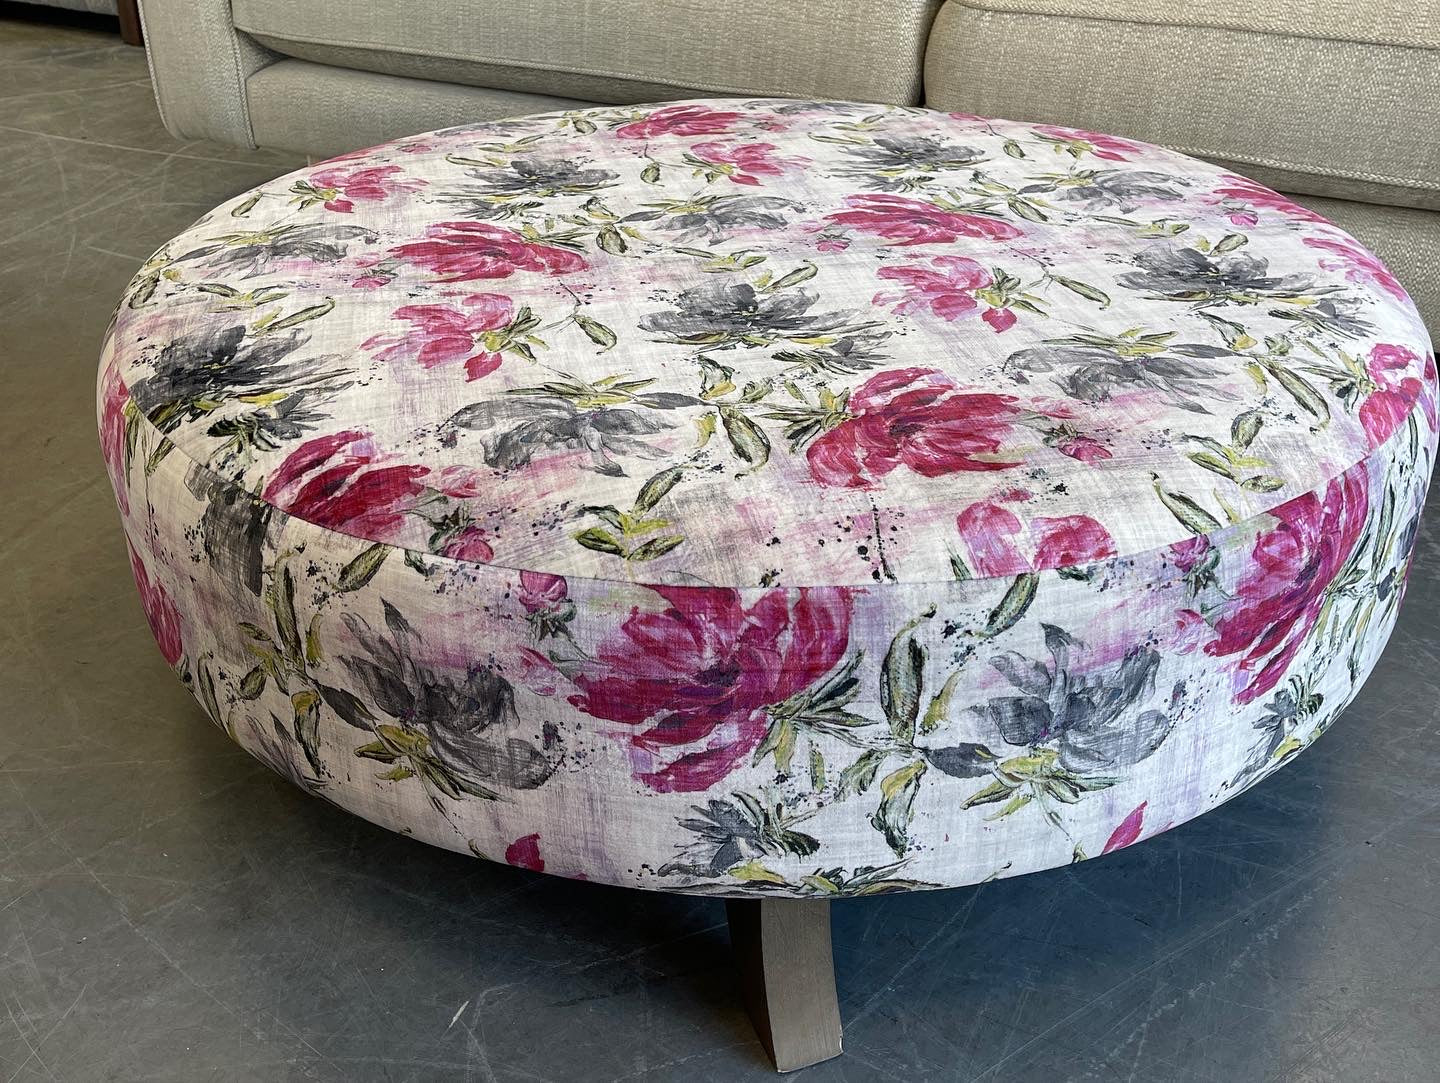 SOFOLOGY MAYA XL round footstool in floral velvet fabric